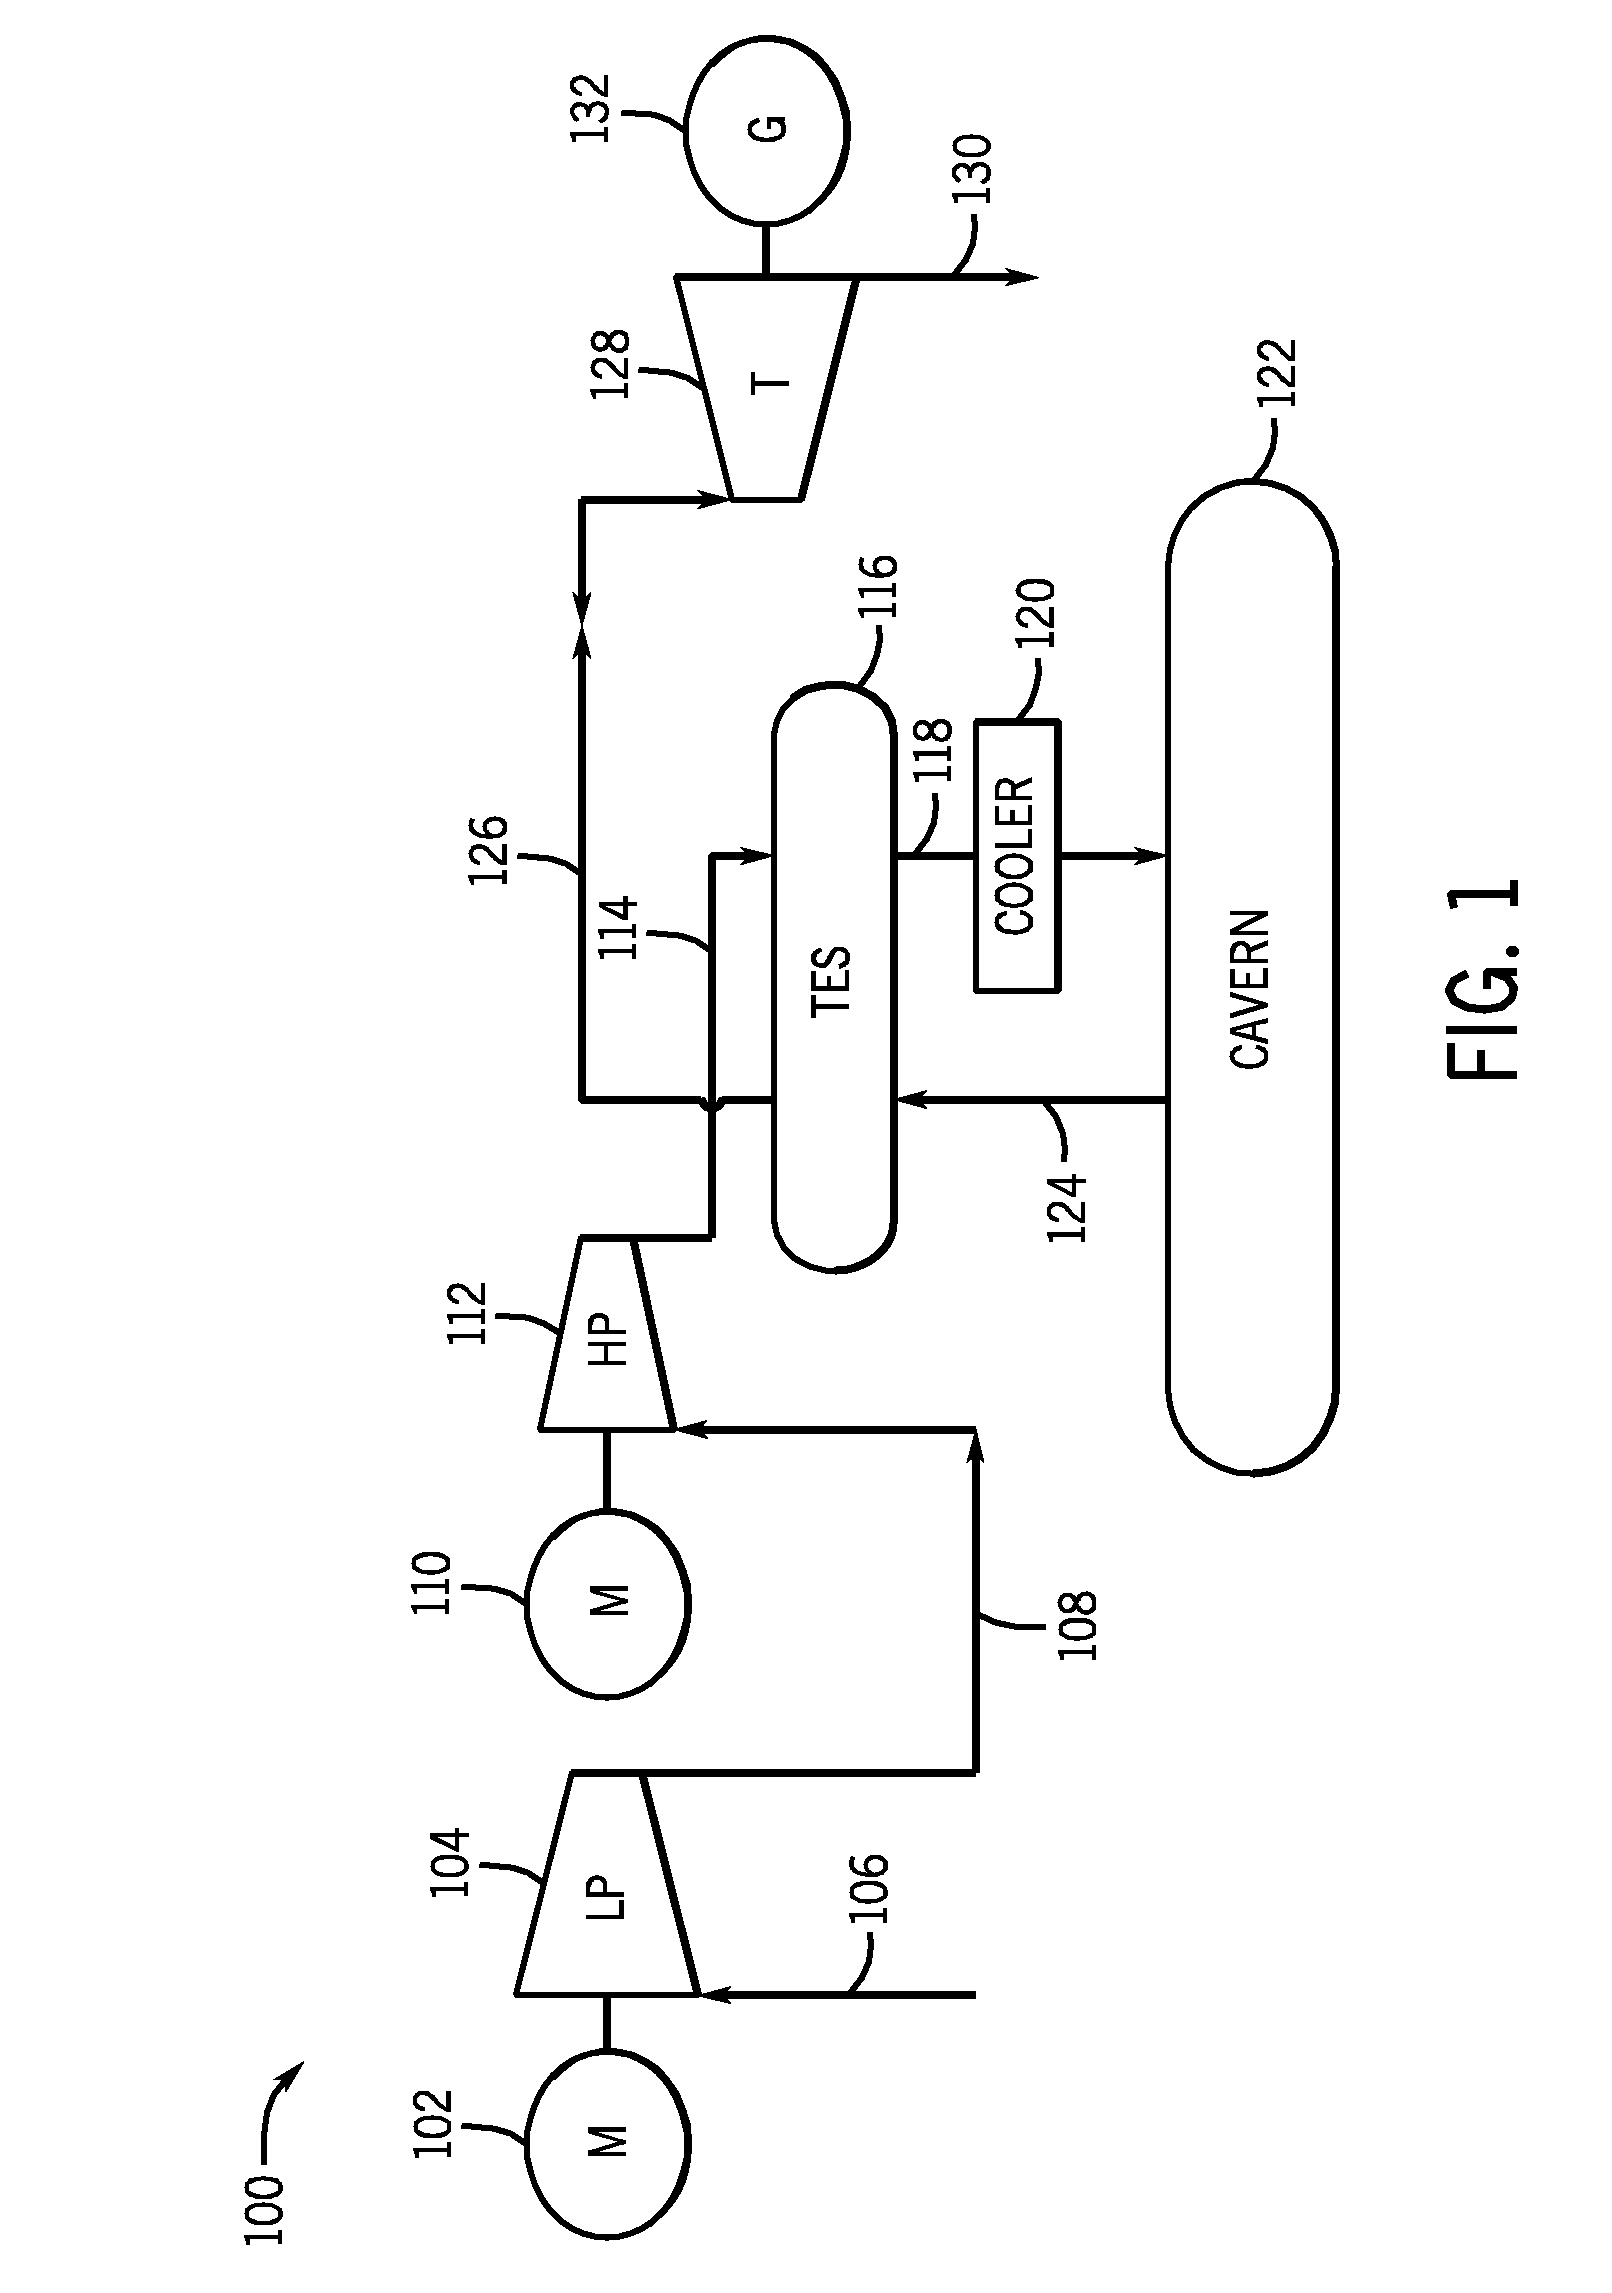 Reinforced thermal energy storage pressure vessel for an adiabatic compressed air energy storage system